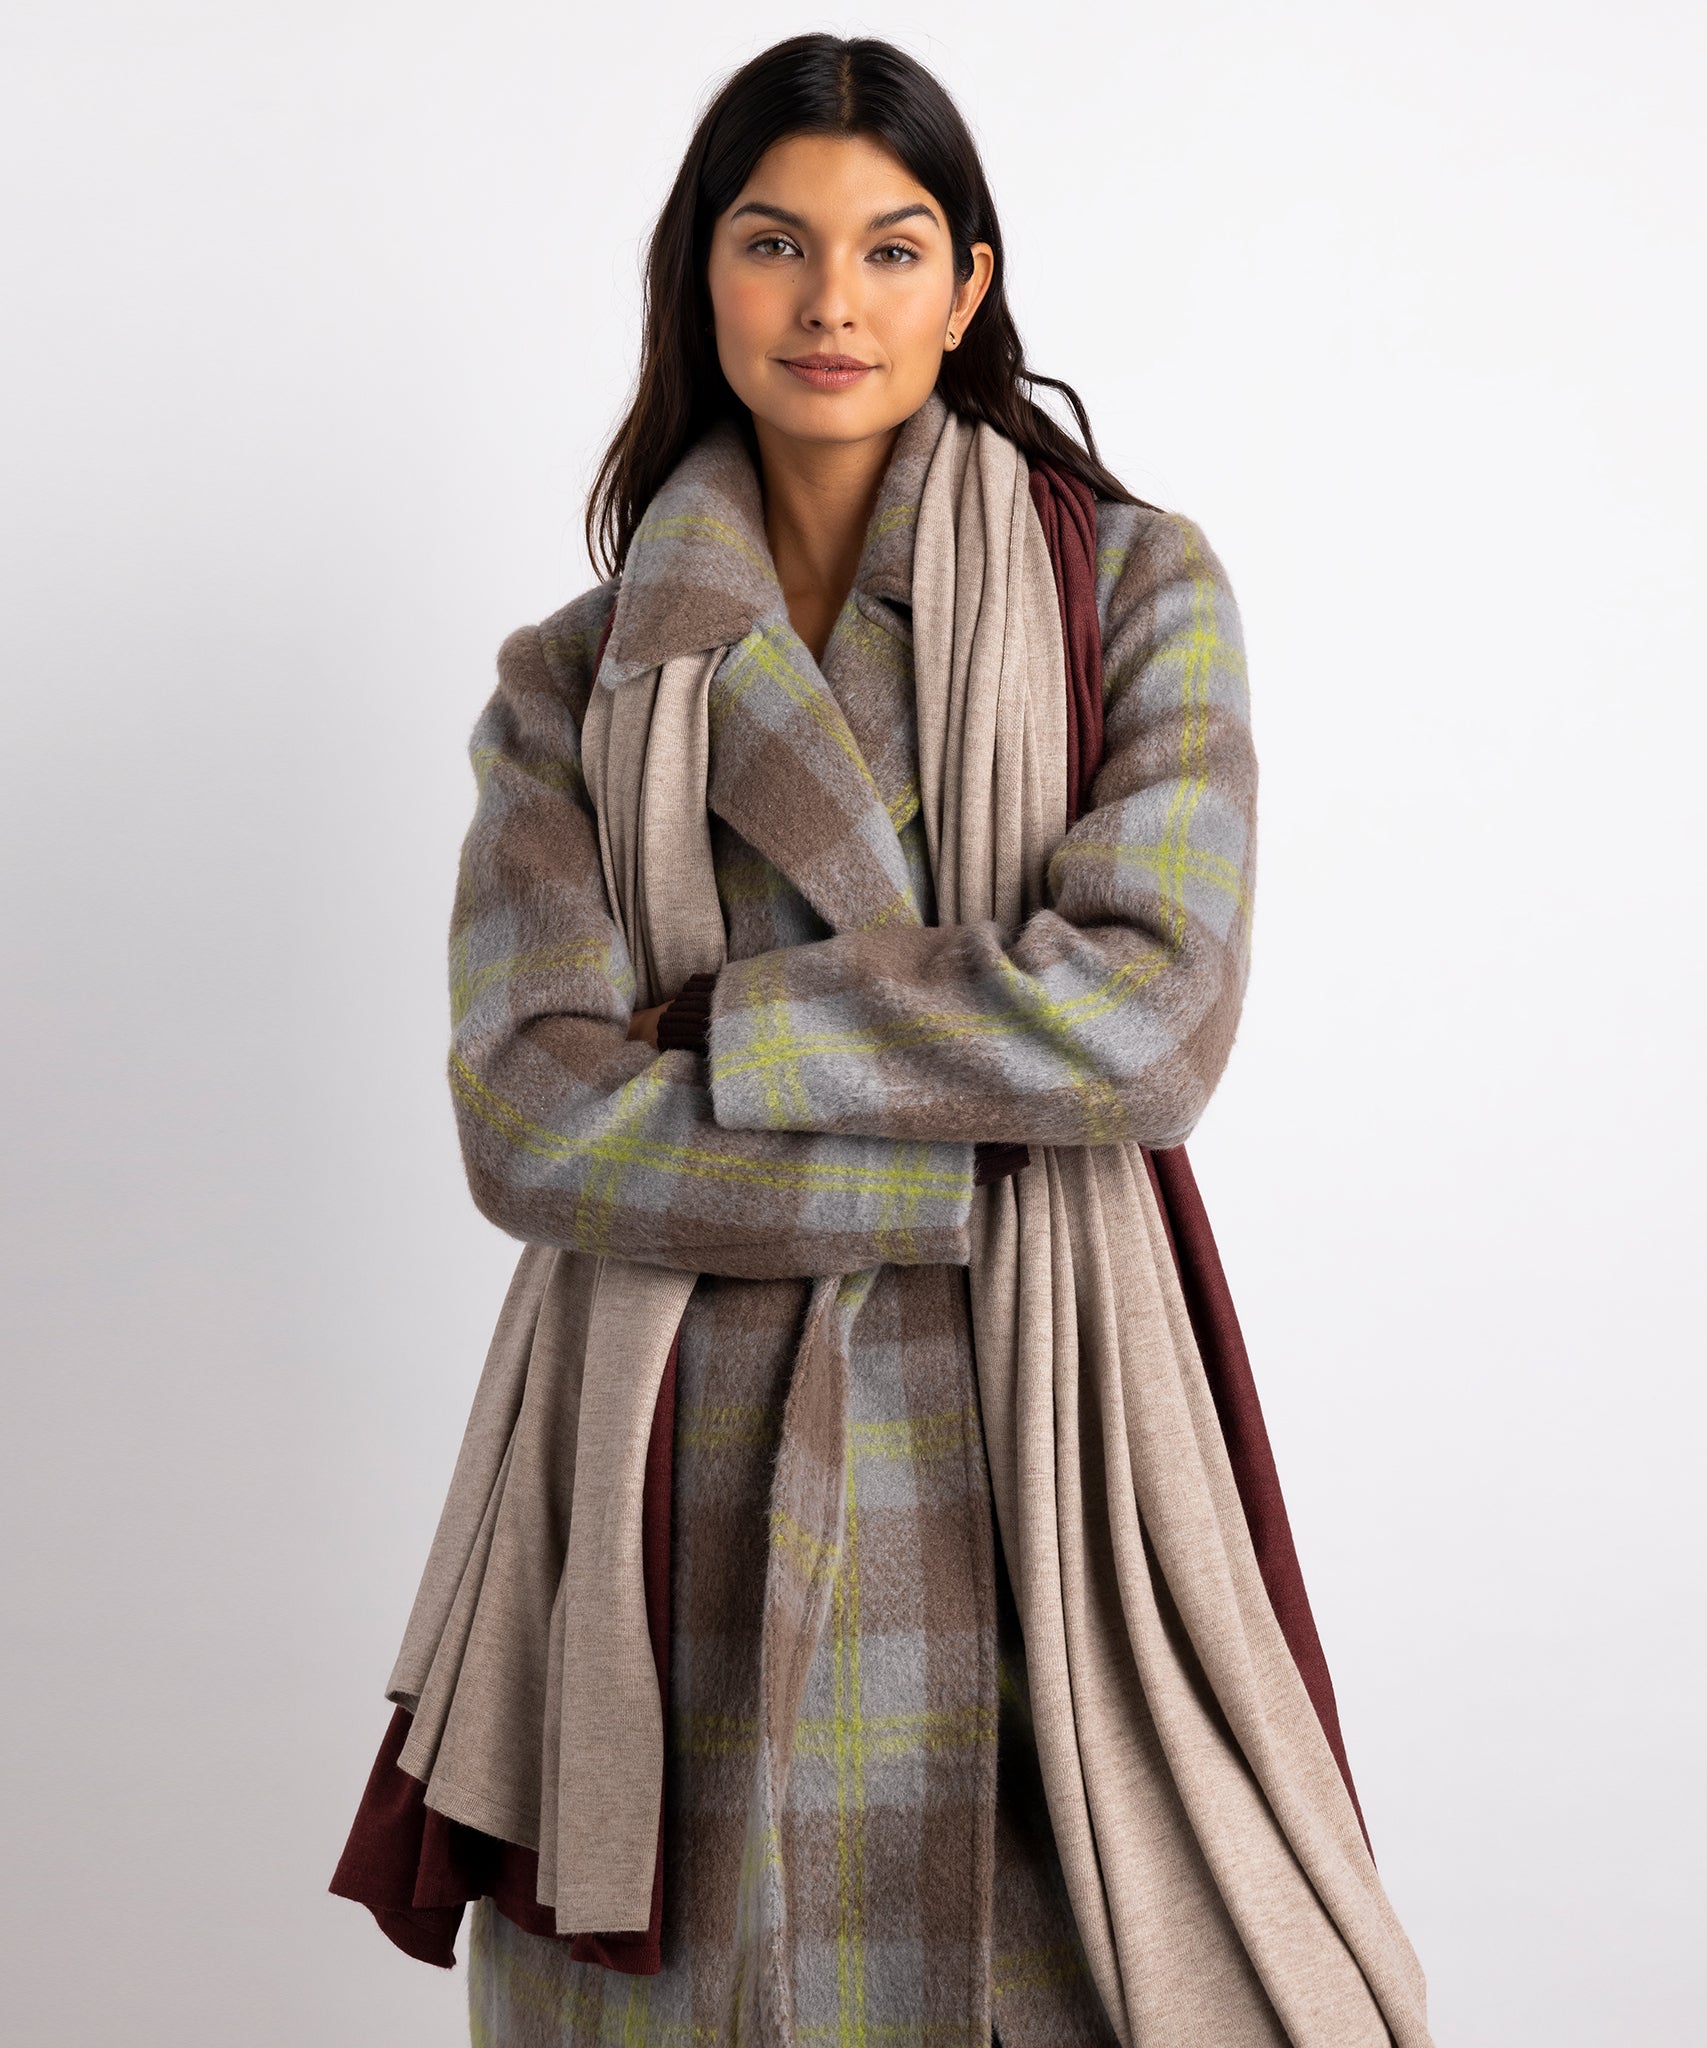 Model wearing two Essential Travel Wraps around her neck.  One is the brick colorway and one is the farro colorway.  She is wearing a plaid coat..